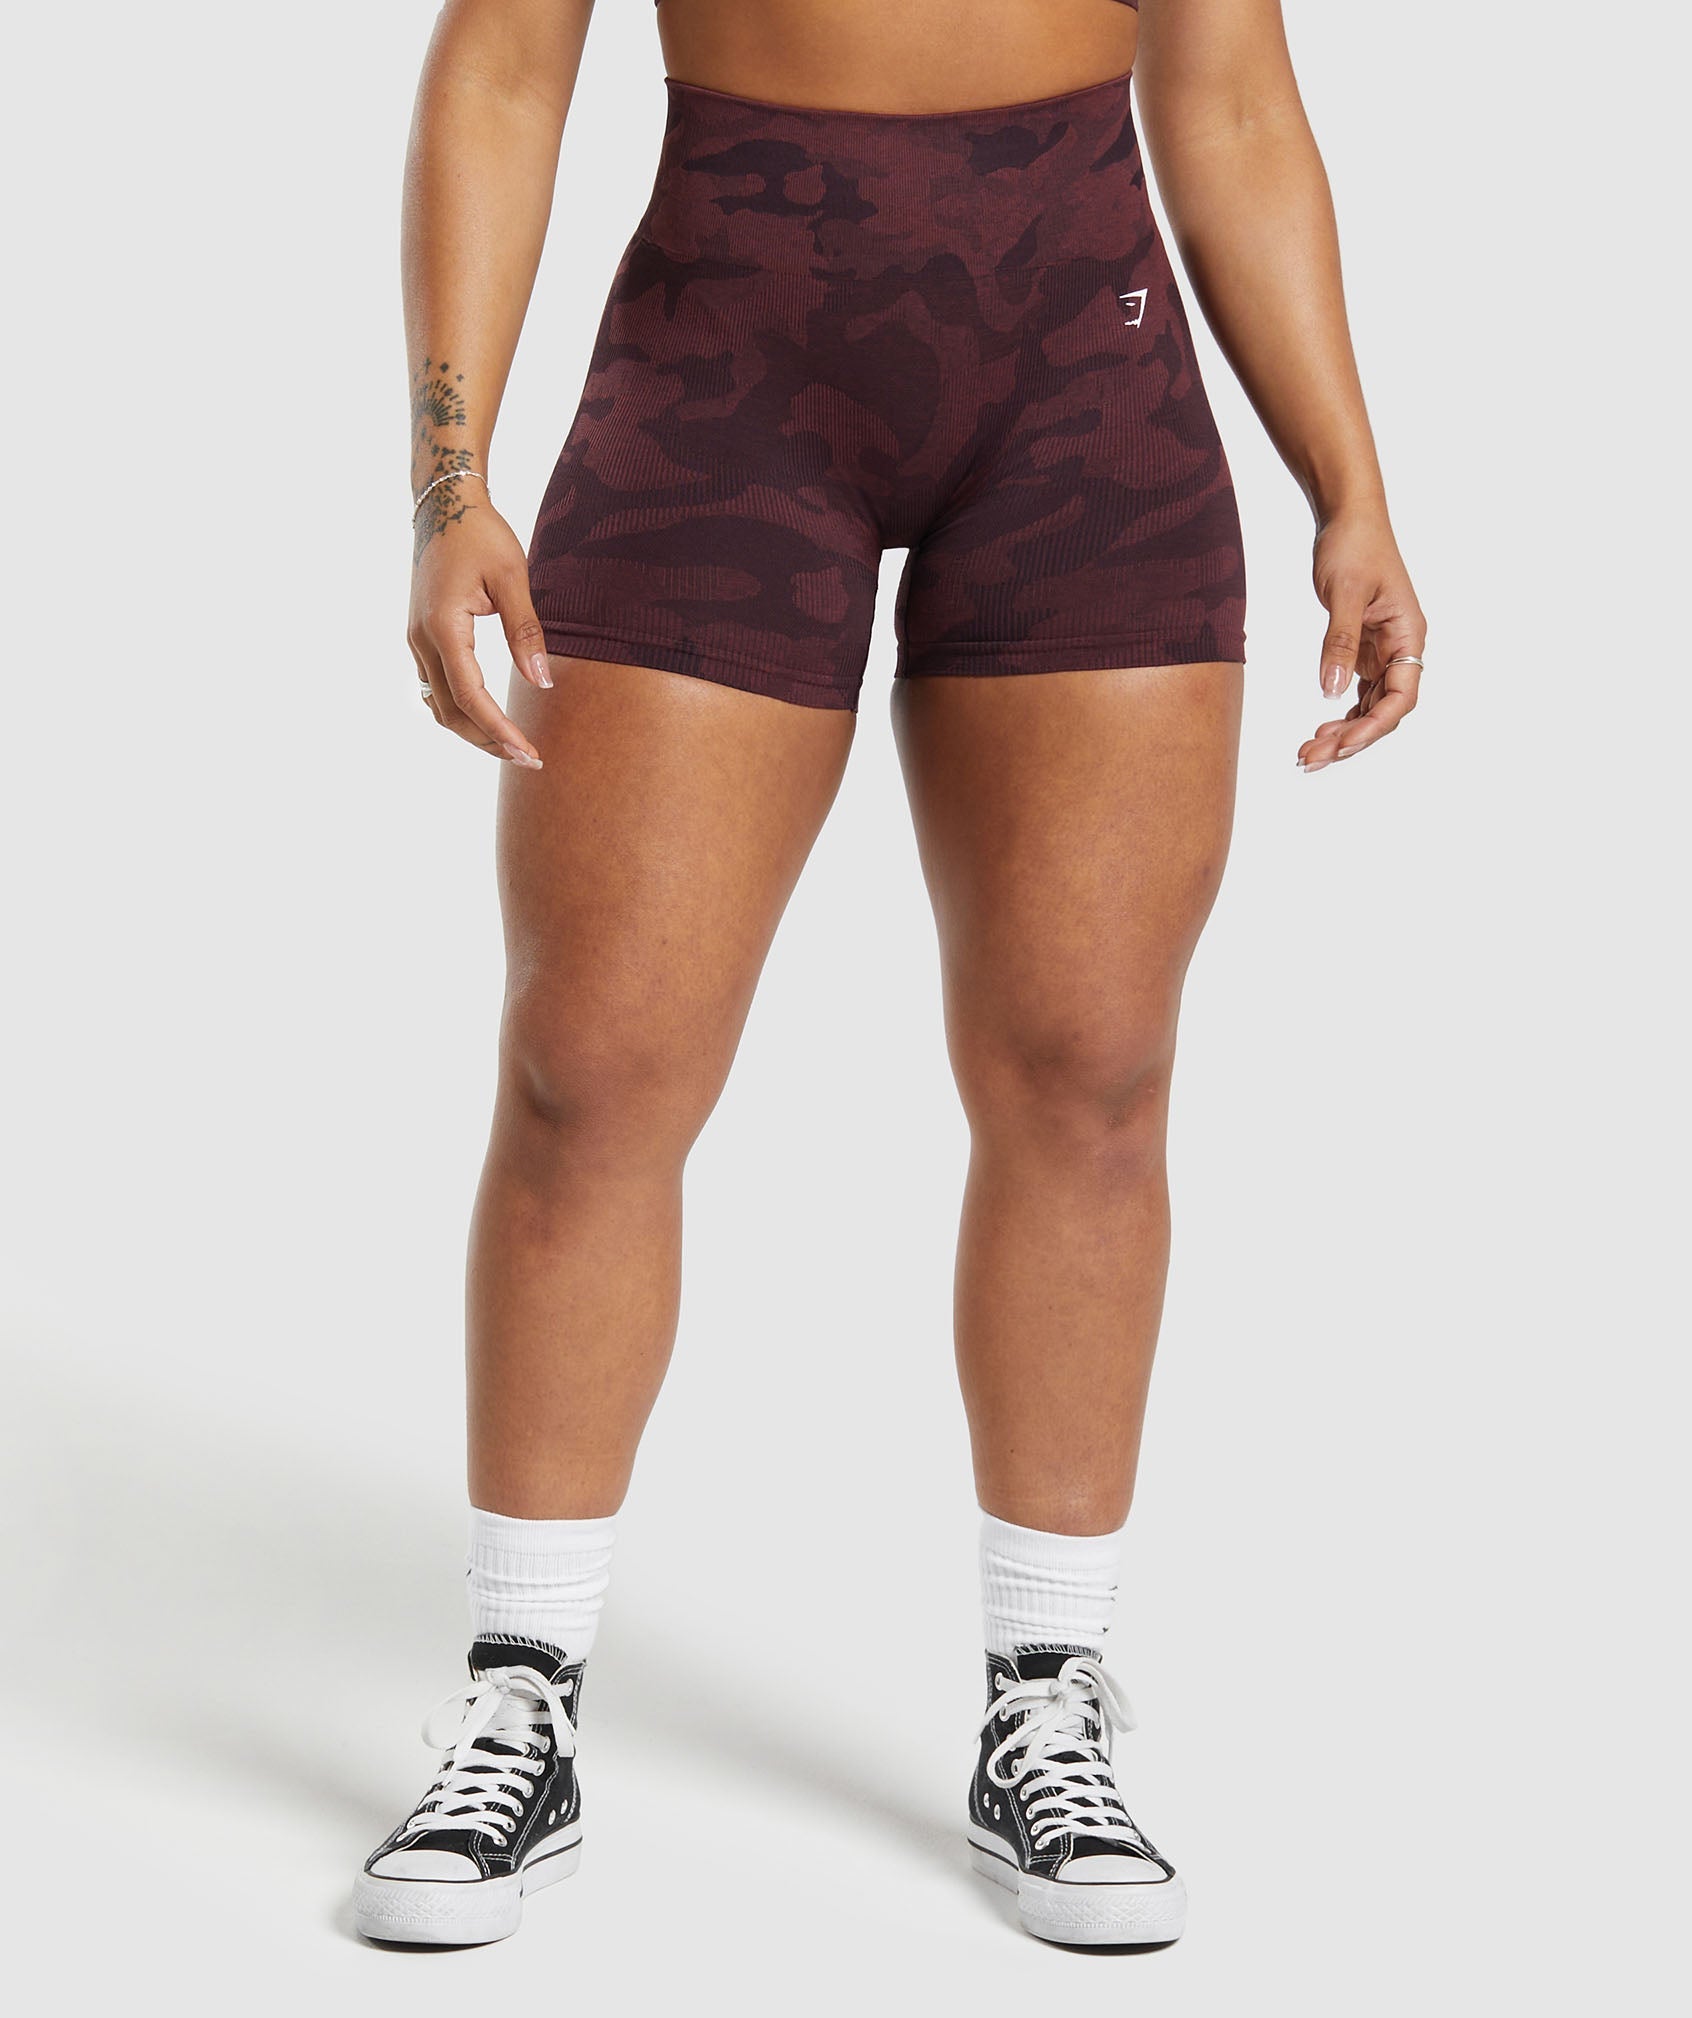 Adapt Camo Seamless Ribbed Shorts in Plum Brown/Burgundy Brown